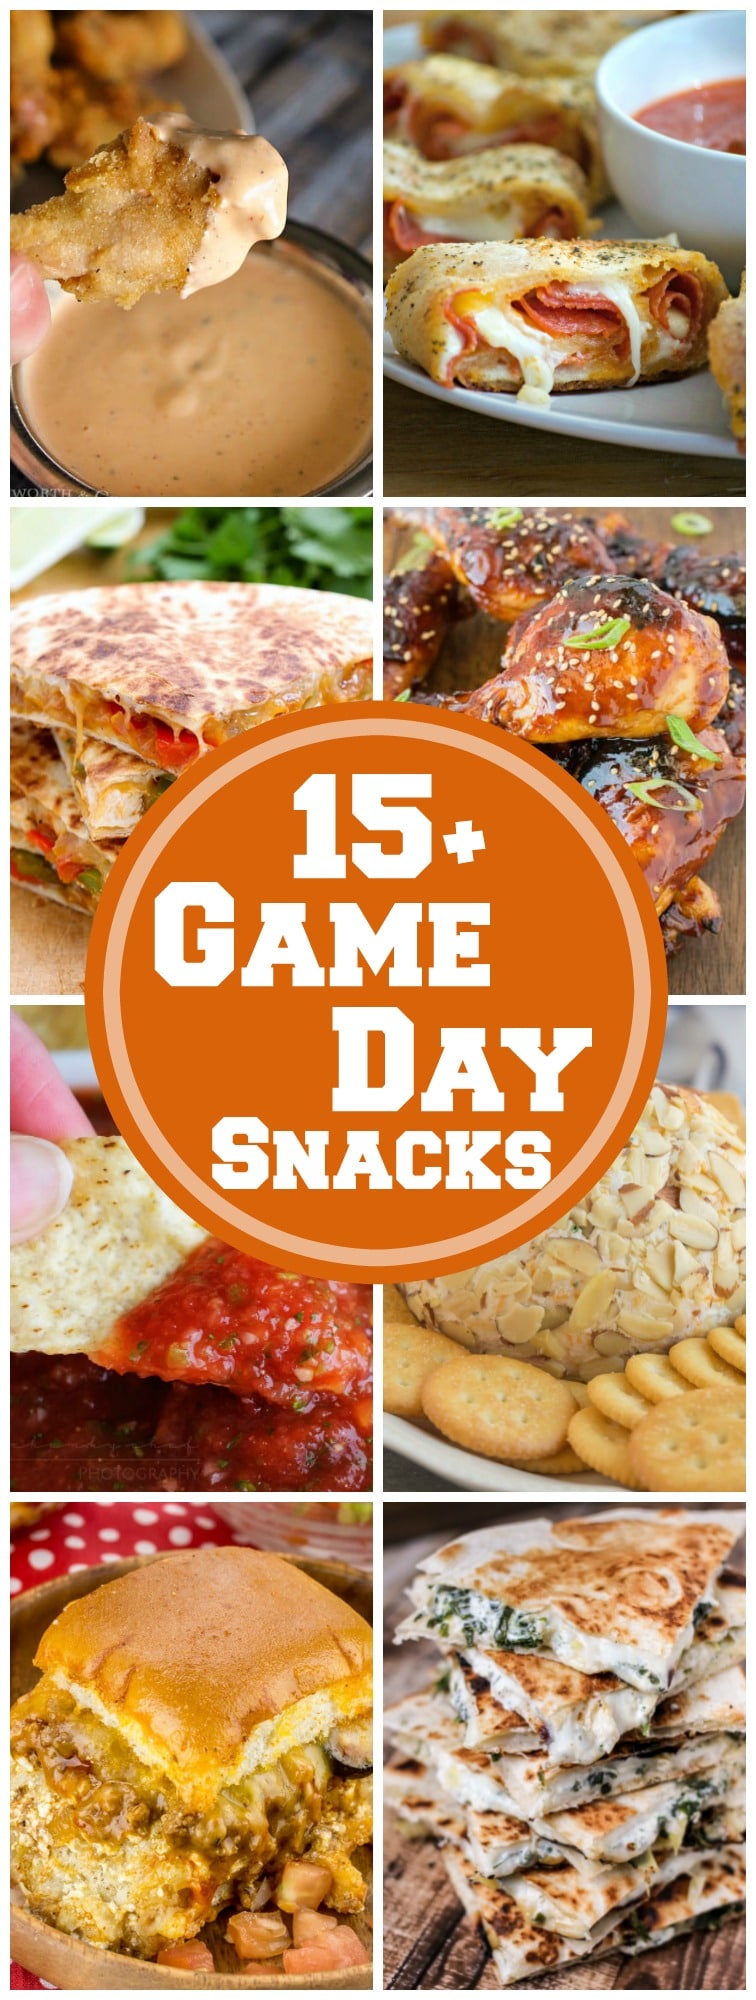 Mouthwatering Game Day Snacks | Whether you're having a big party, or watching the game with family, you'll want some awesome game day snacks! | #game #party #appetizers